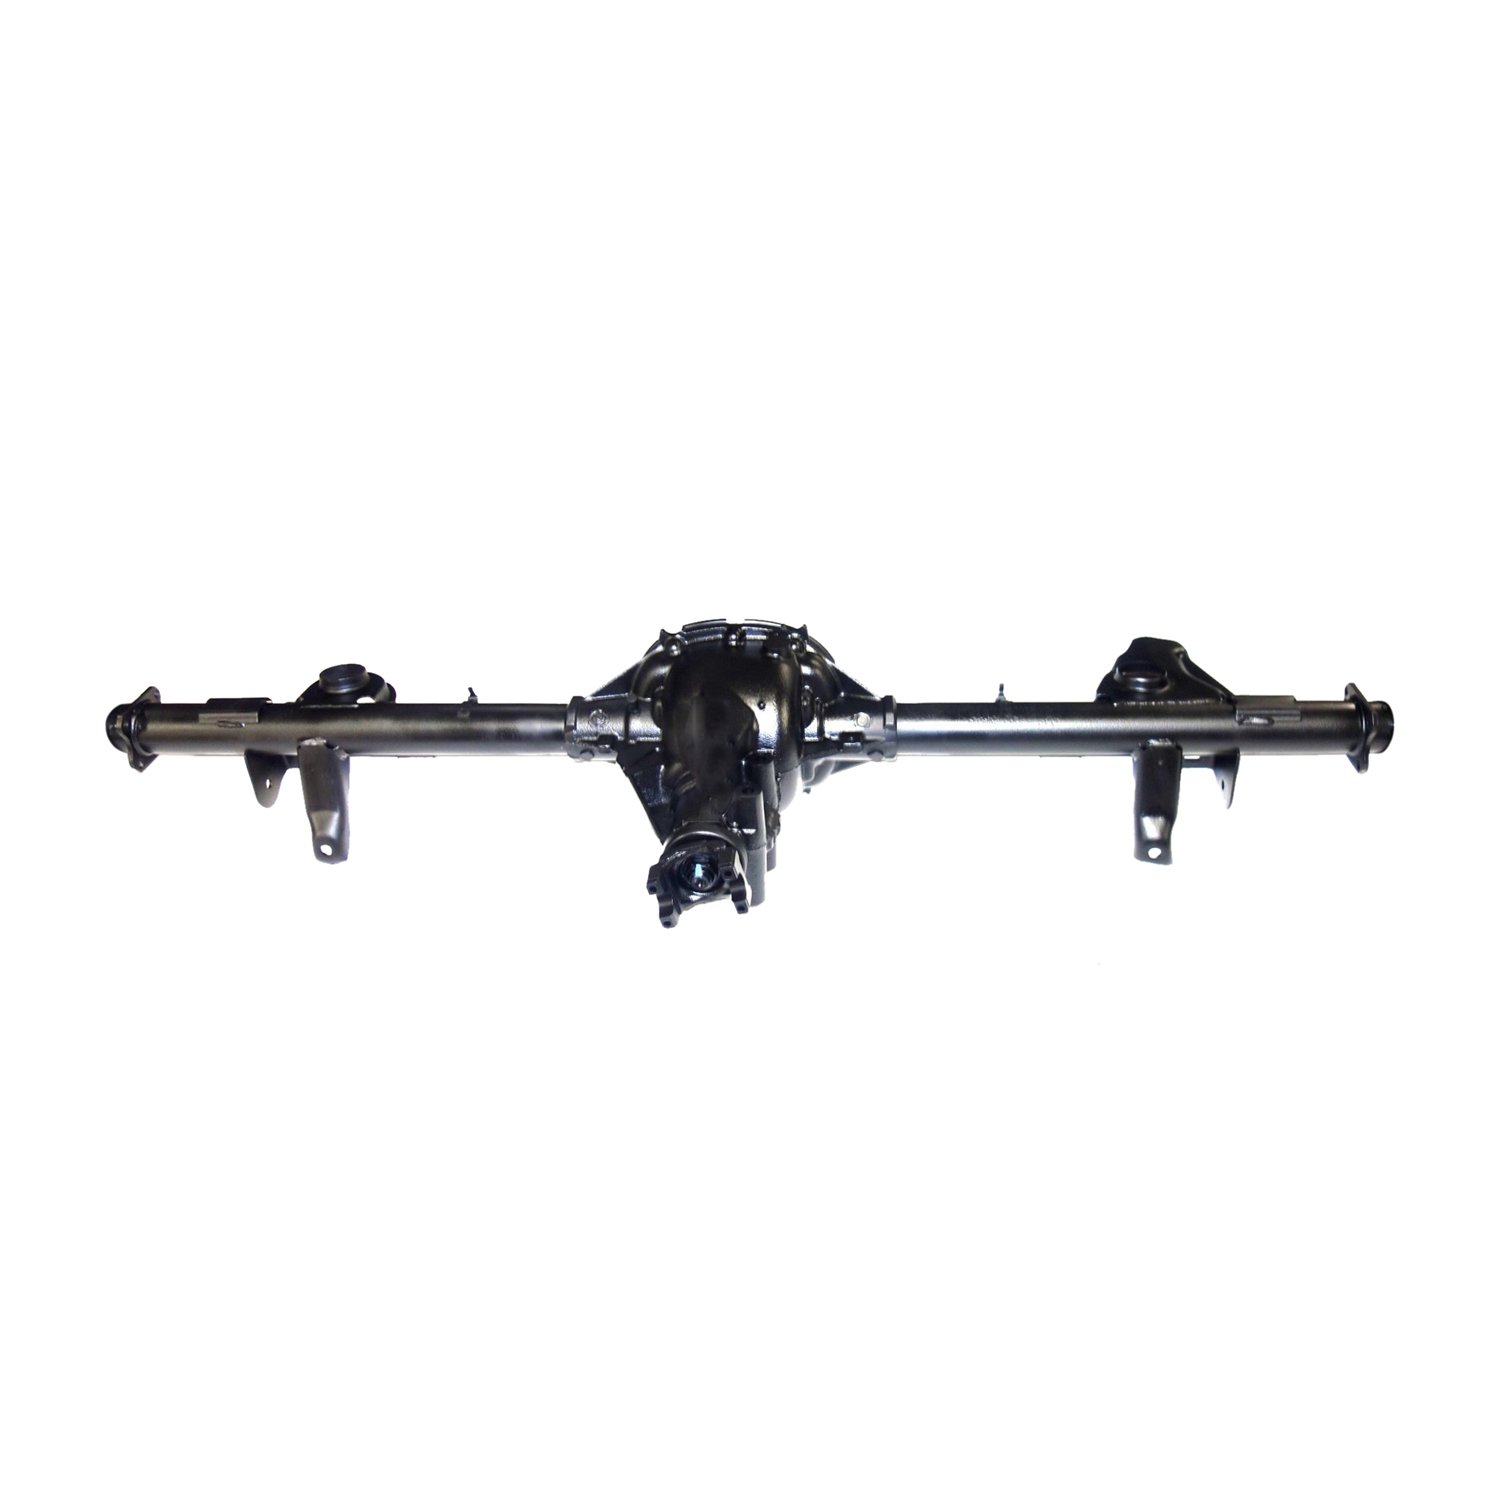 Remanufactured Axle Assy for GM 7.5" 95-97 S10 Blazer & S15 Jimmy, 3.73 , 4x4, Posi LSD